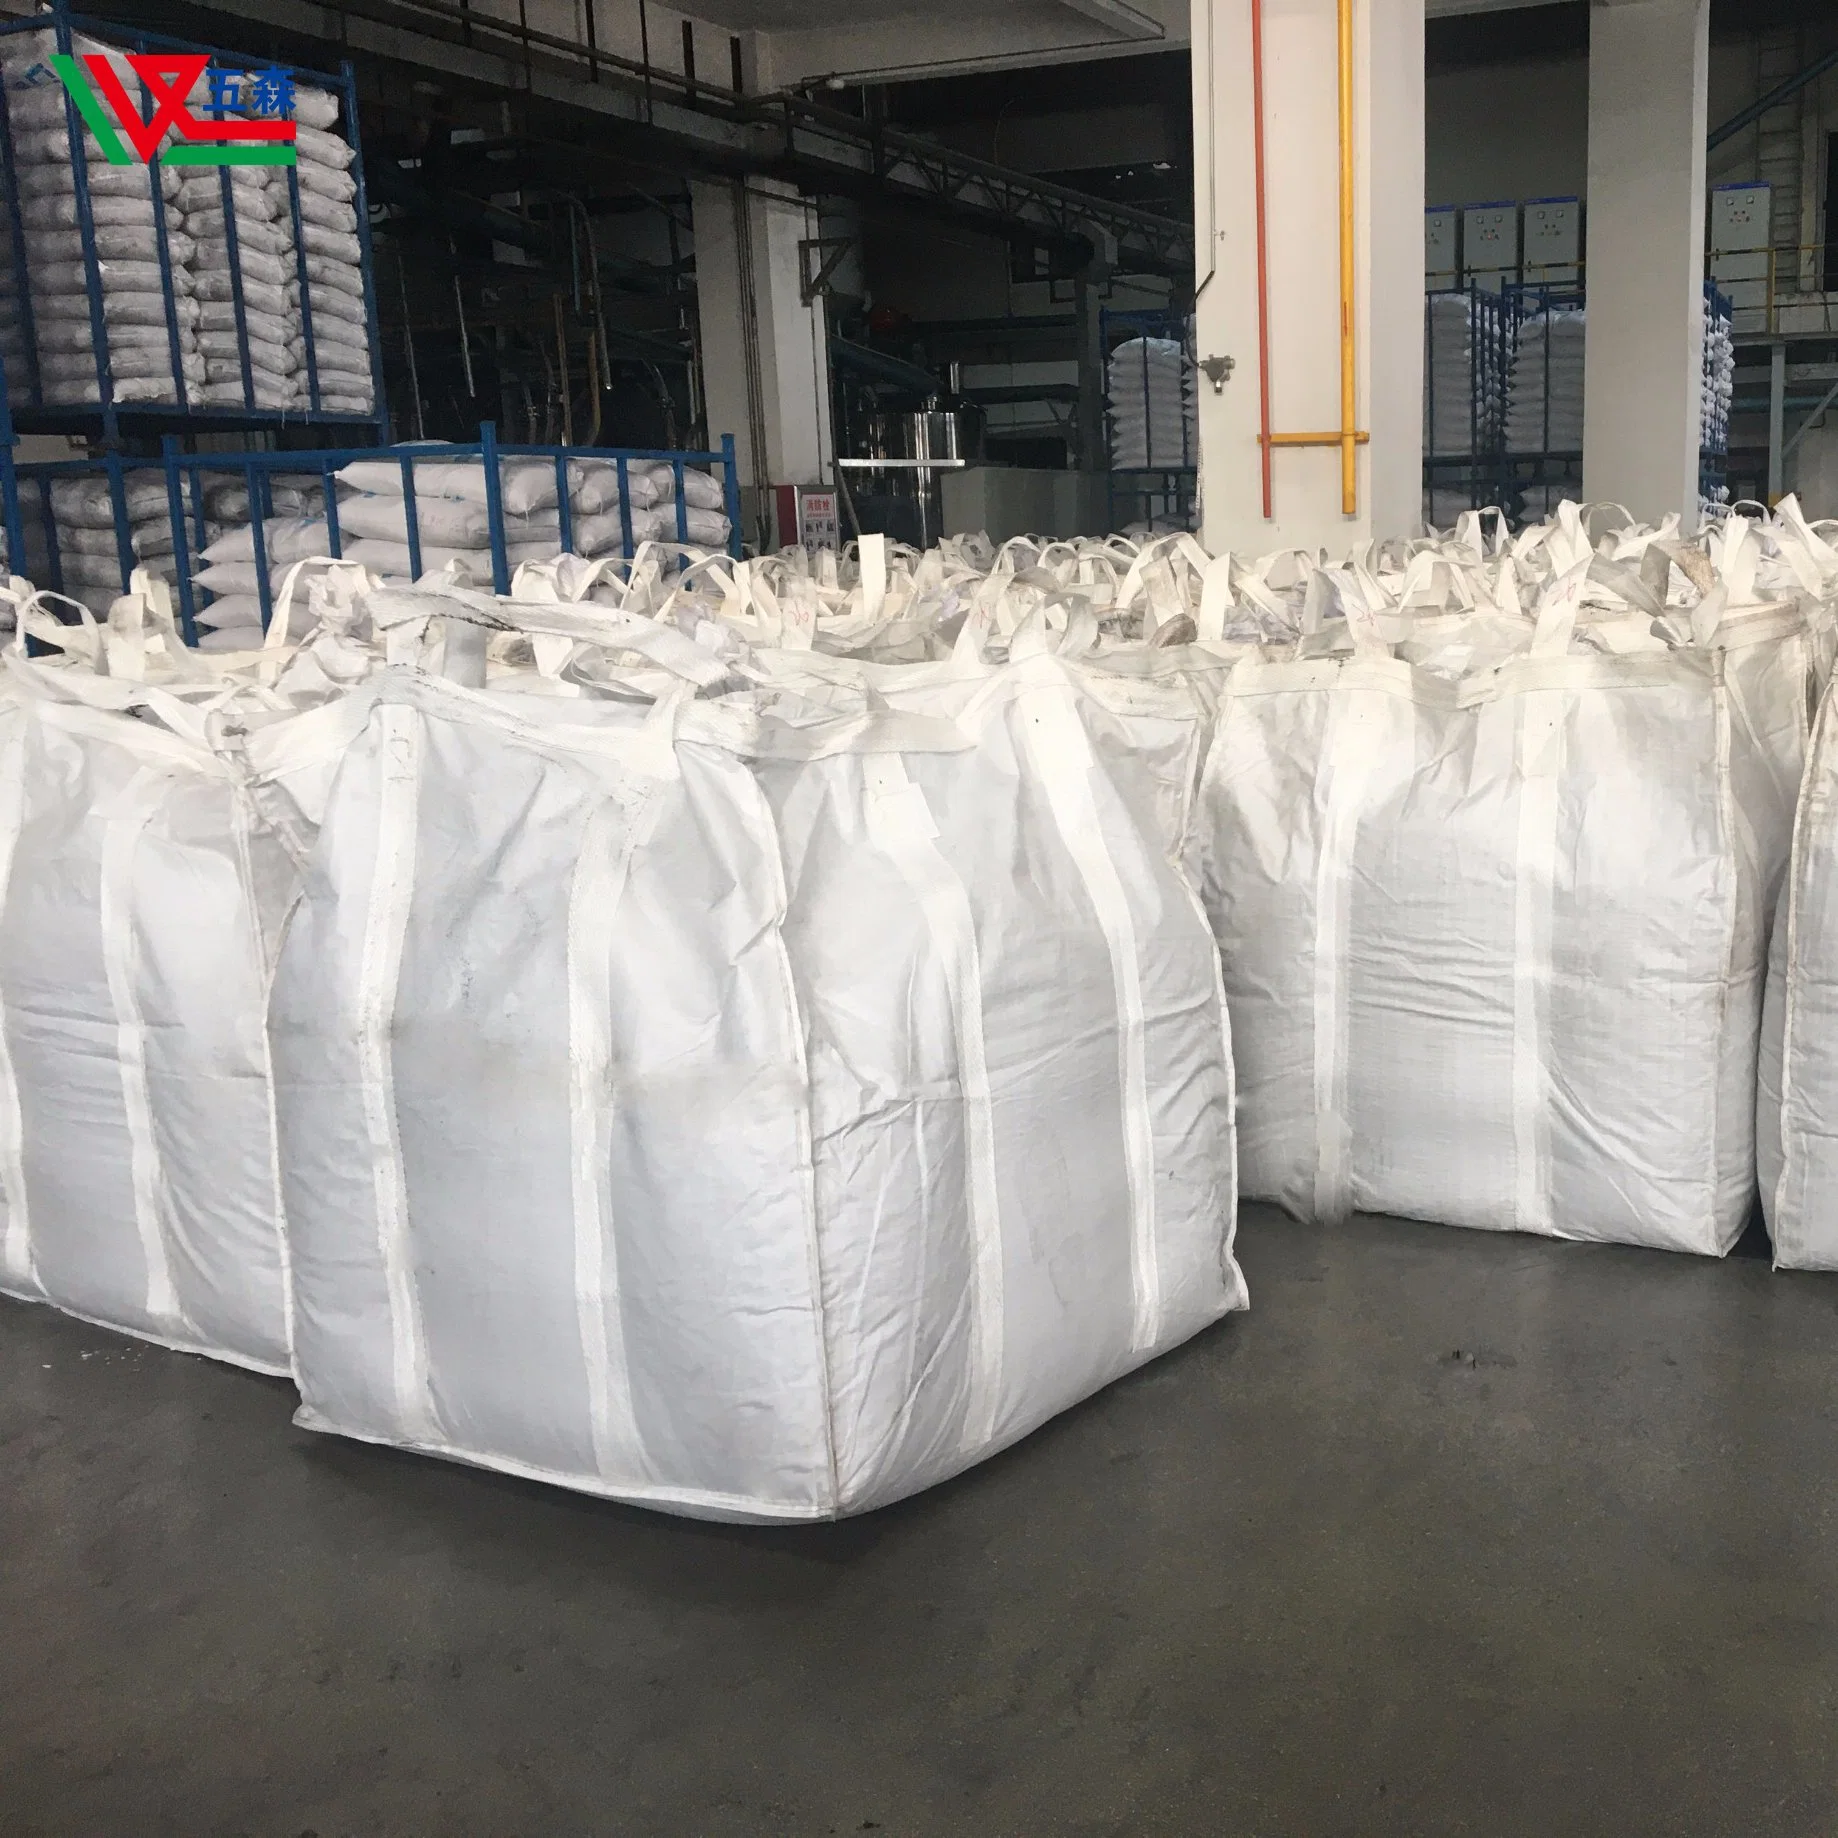 Special Tire Rubber Powder for 40m Rubber Track